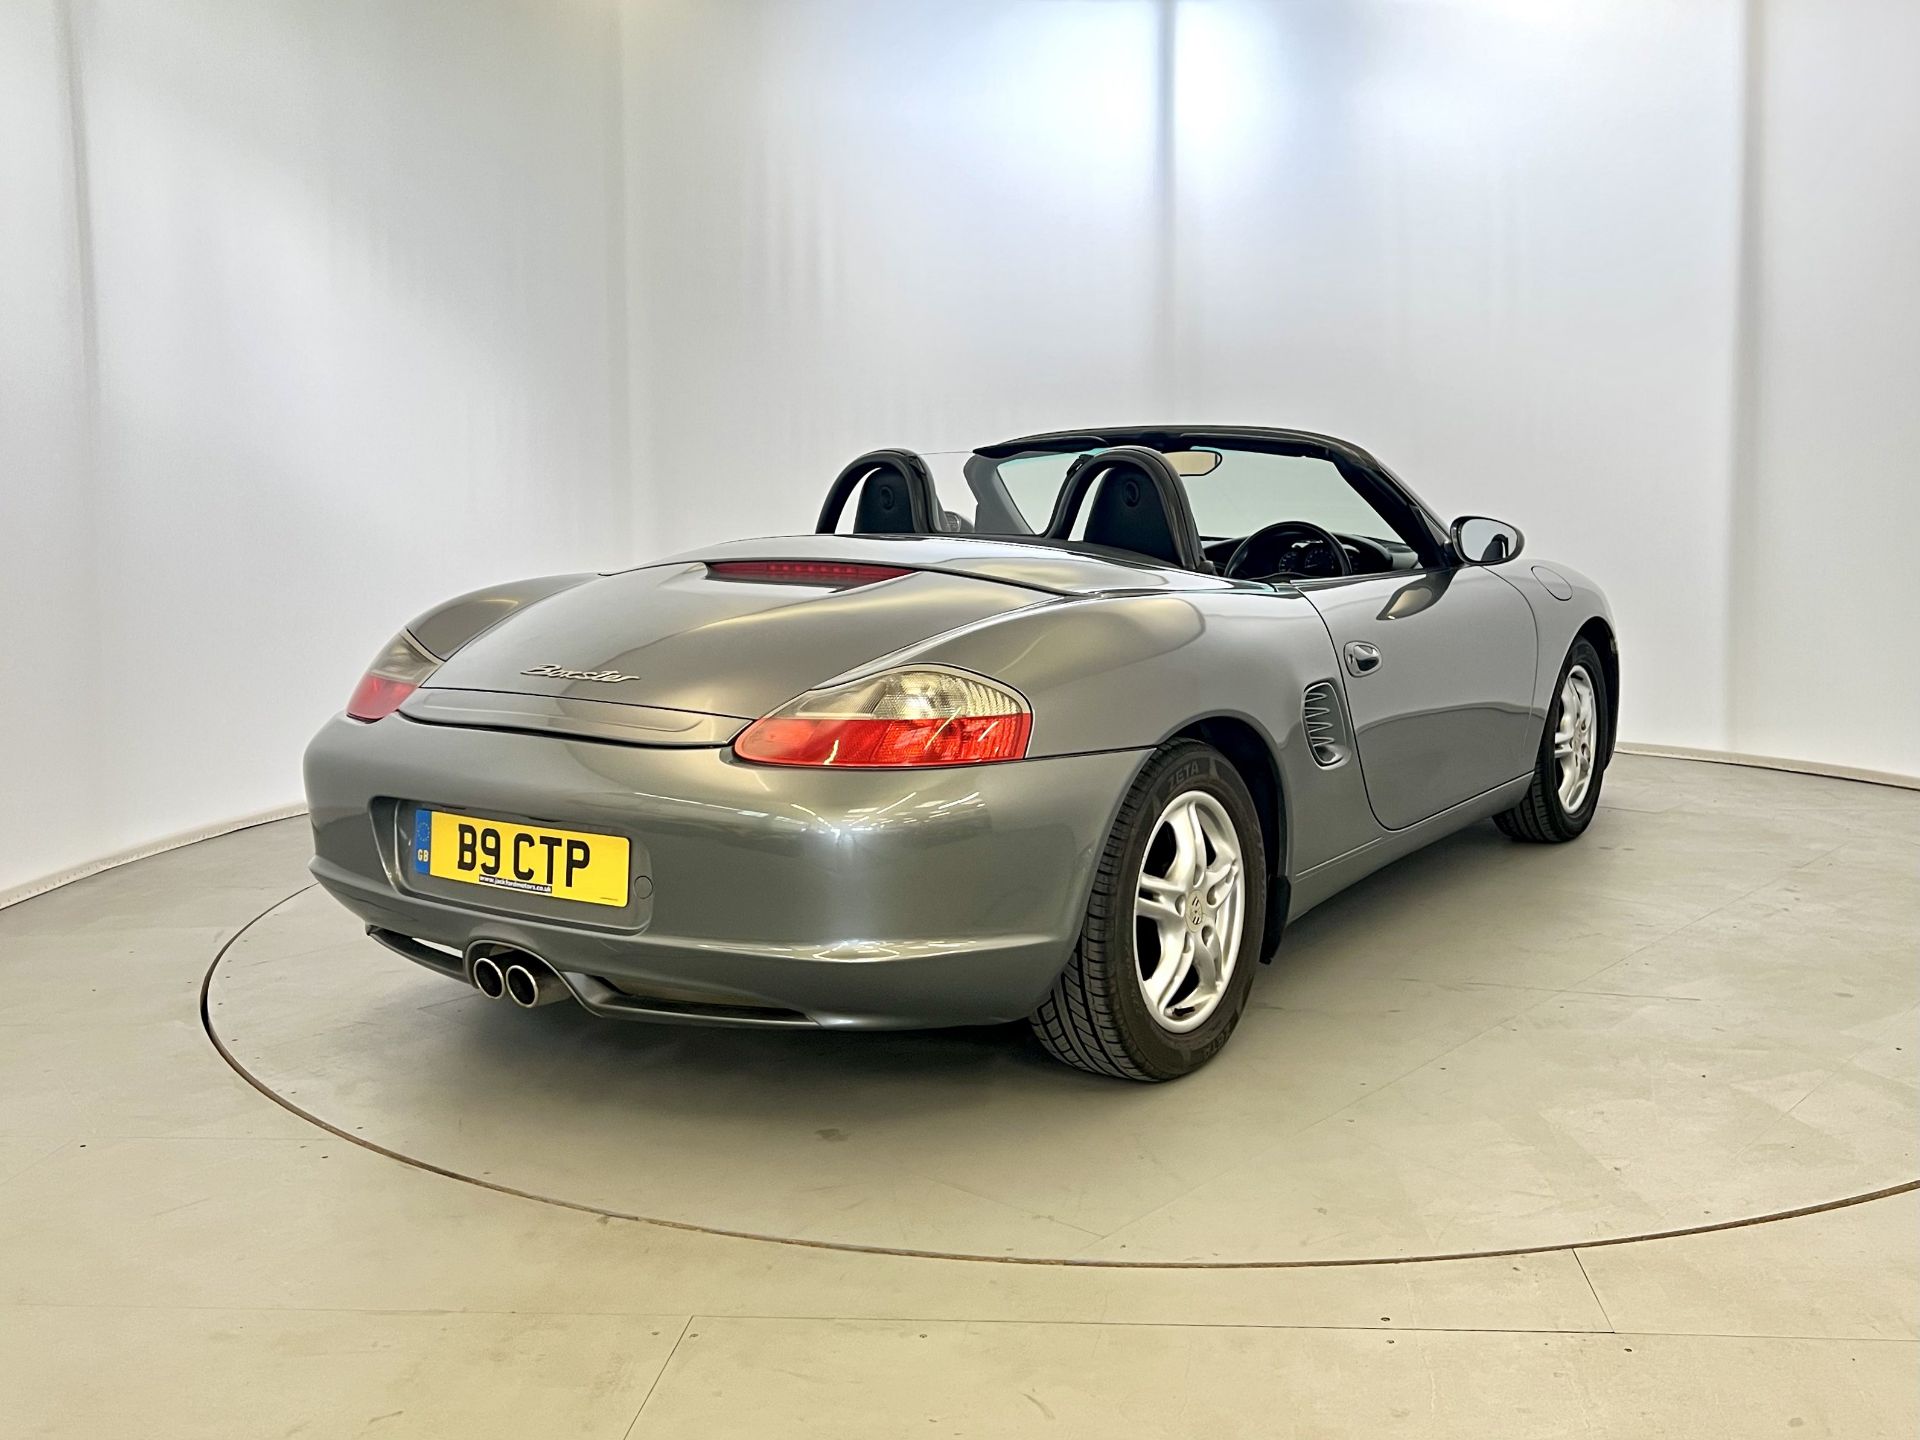 Porshe Boxster - Image 9 of 31